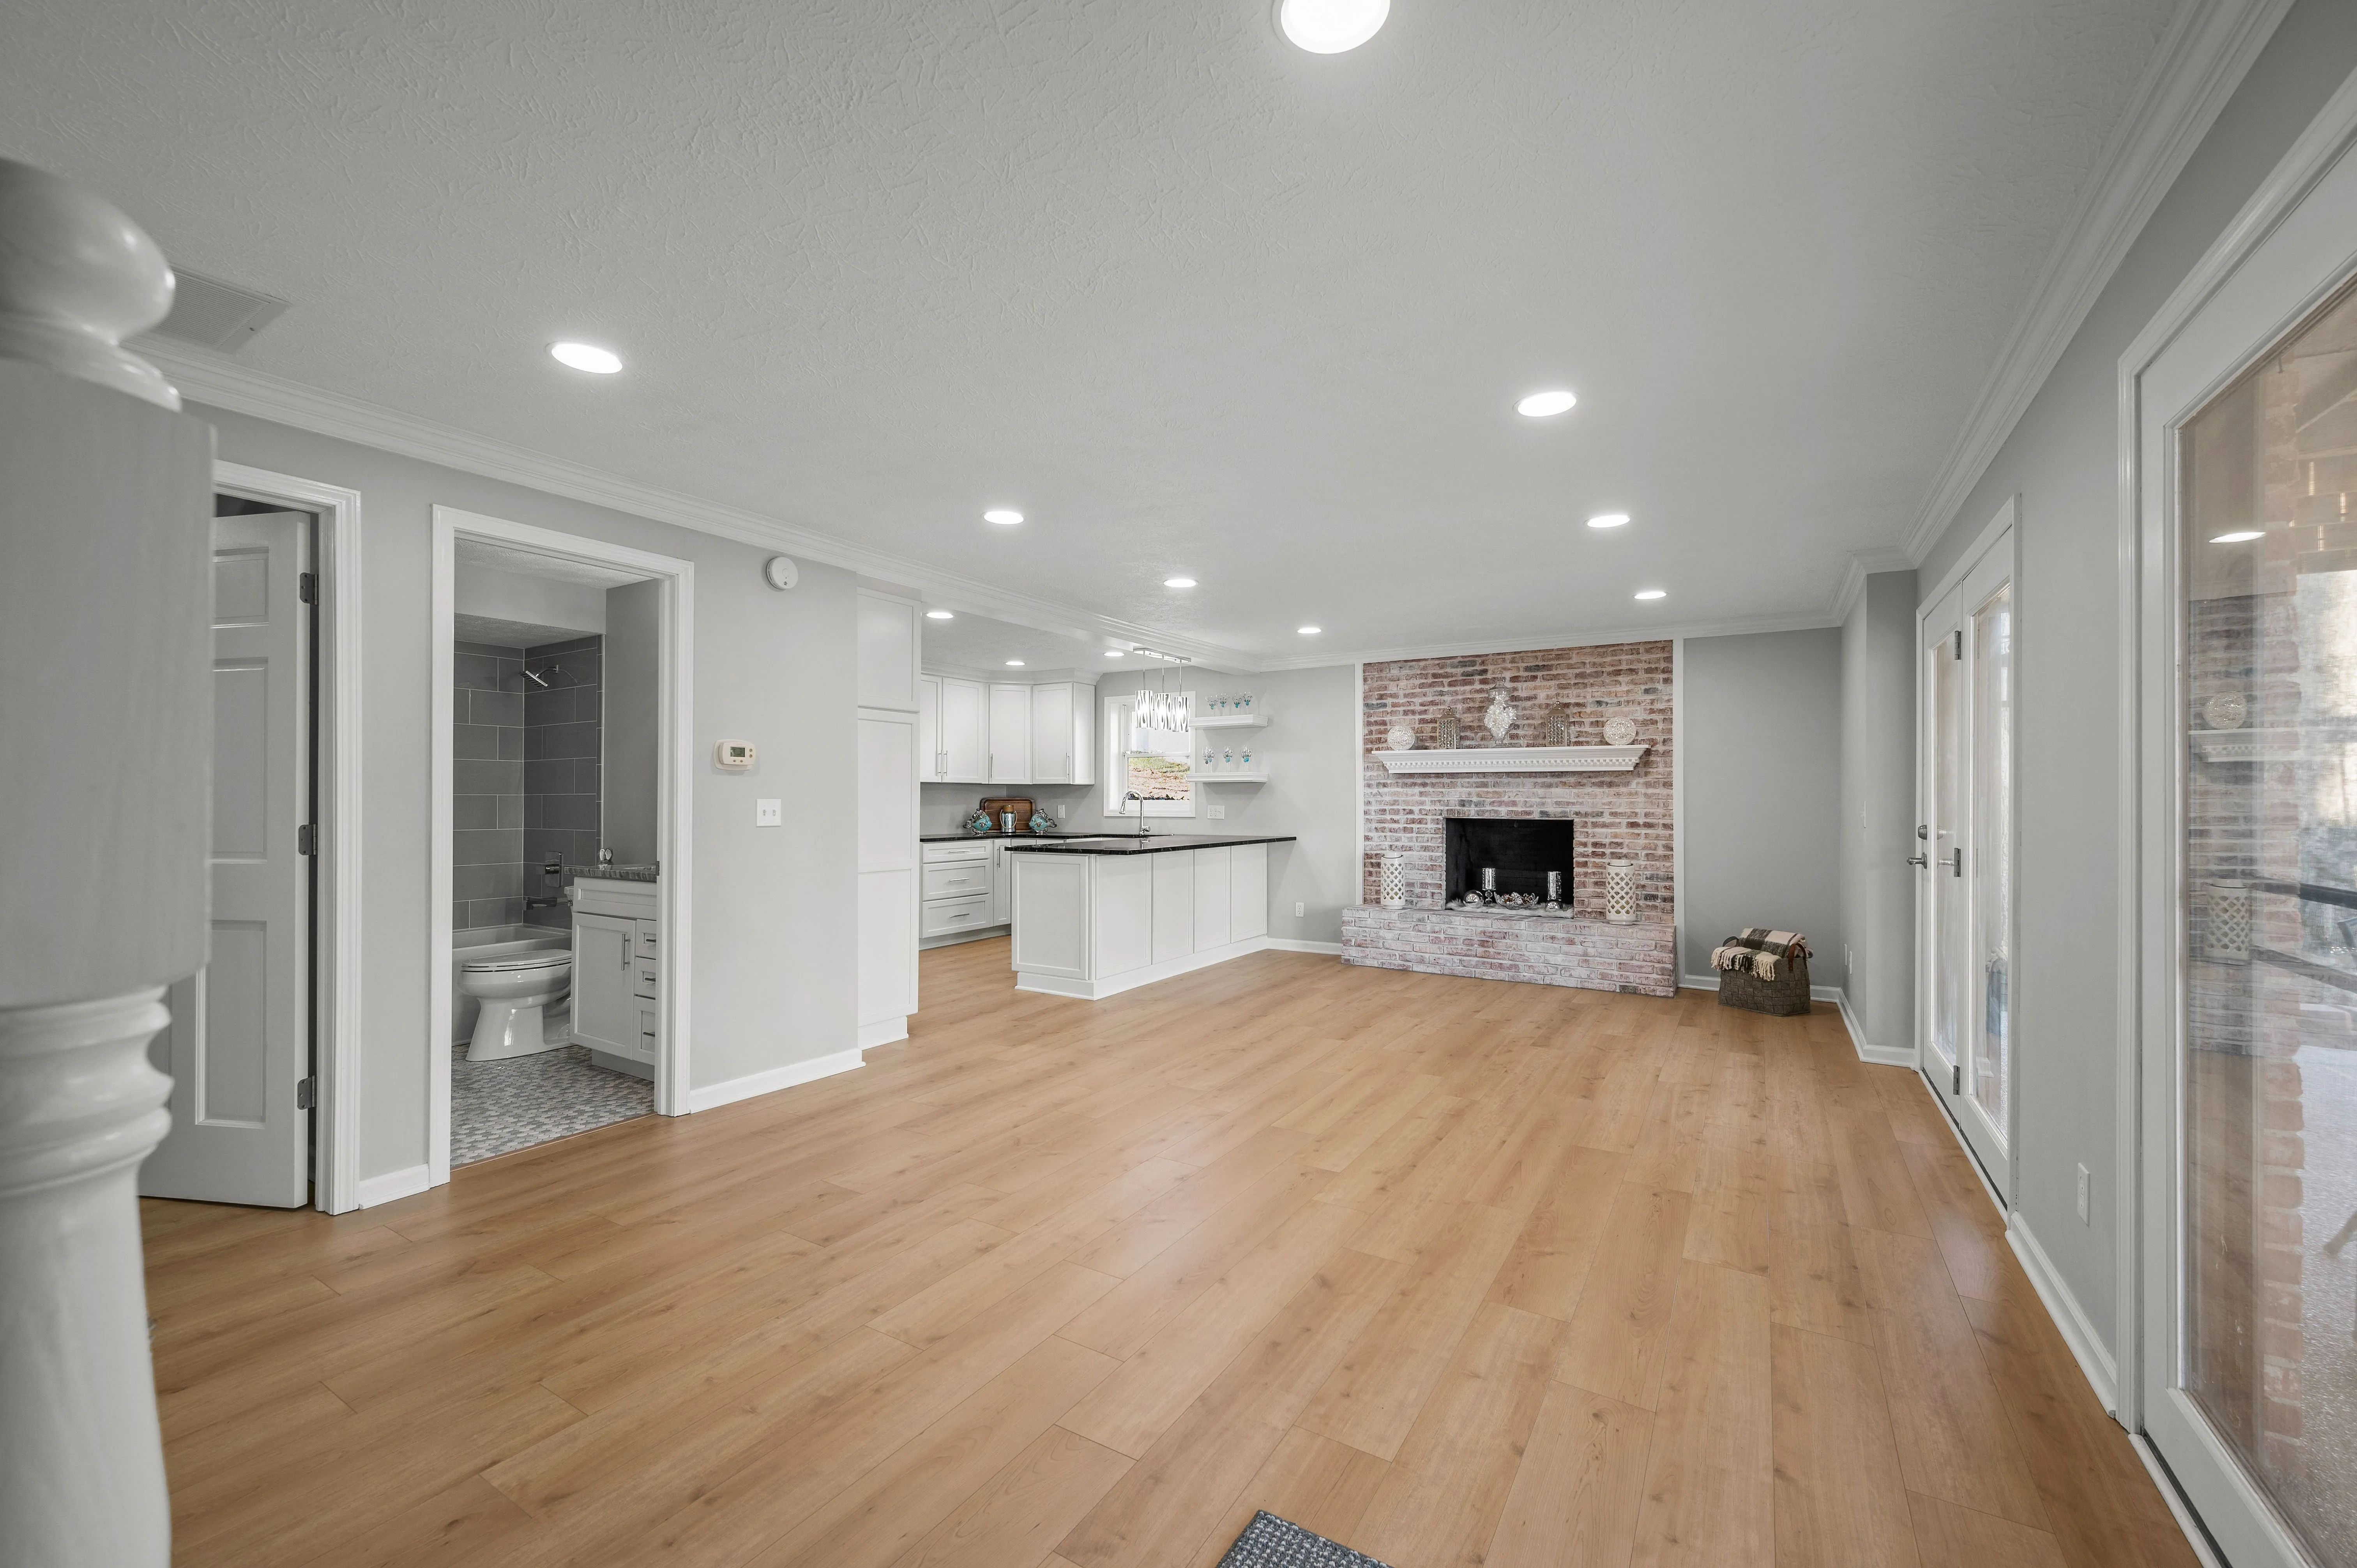 Spacious, well-lit living space with hardwood floors, a fireplace, and an open floor plan leading to the kitchen.